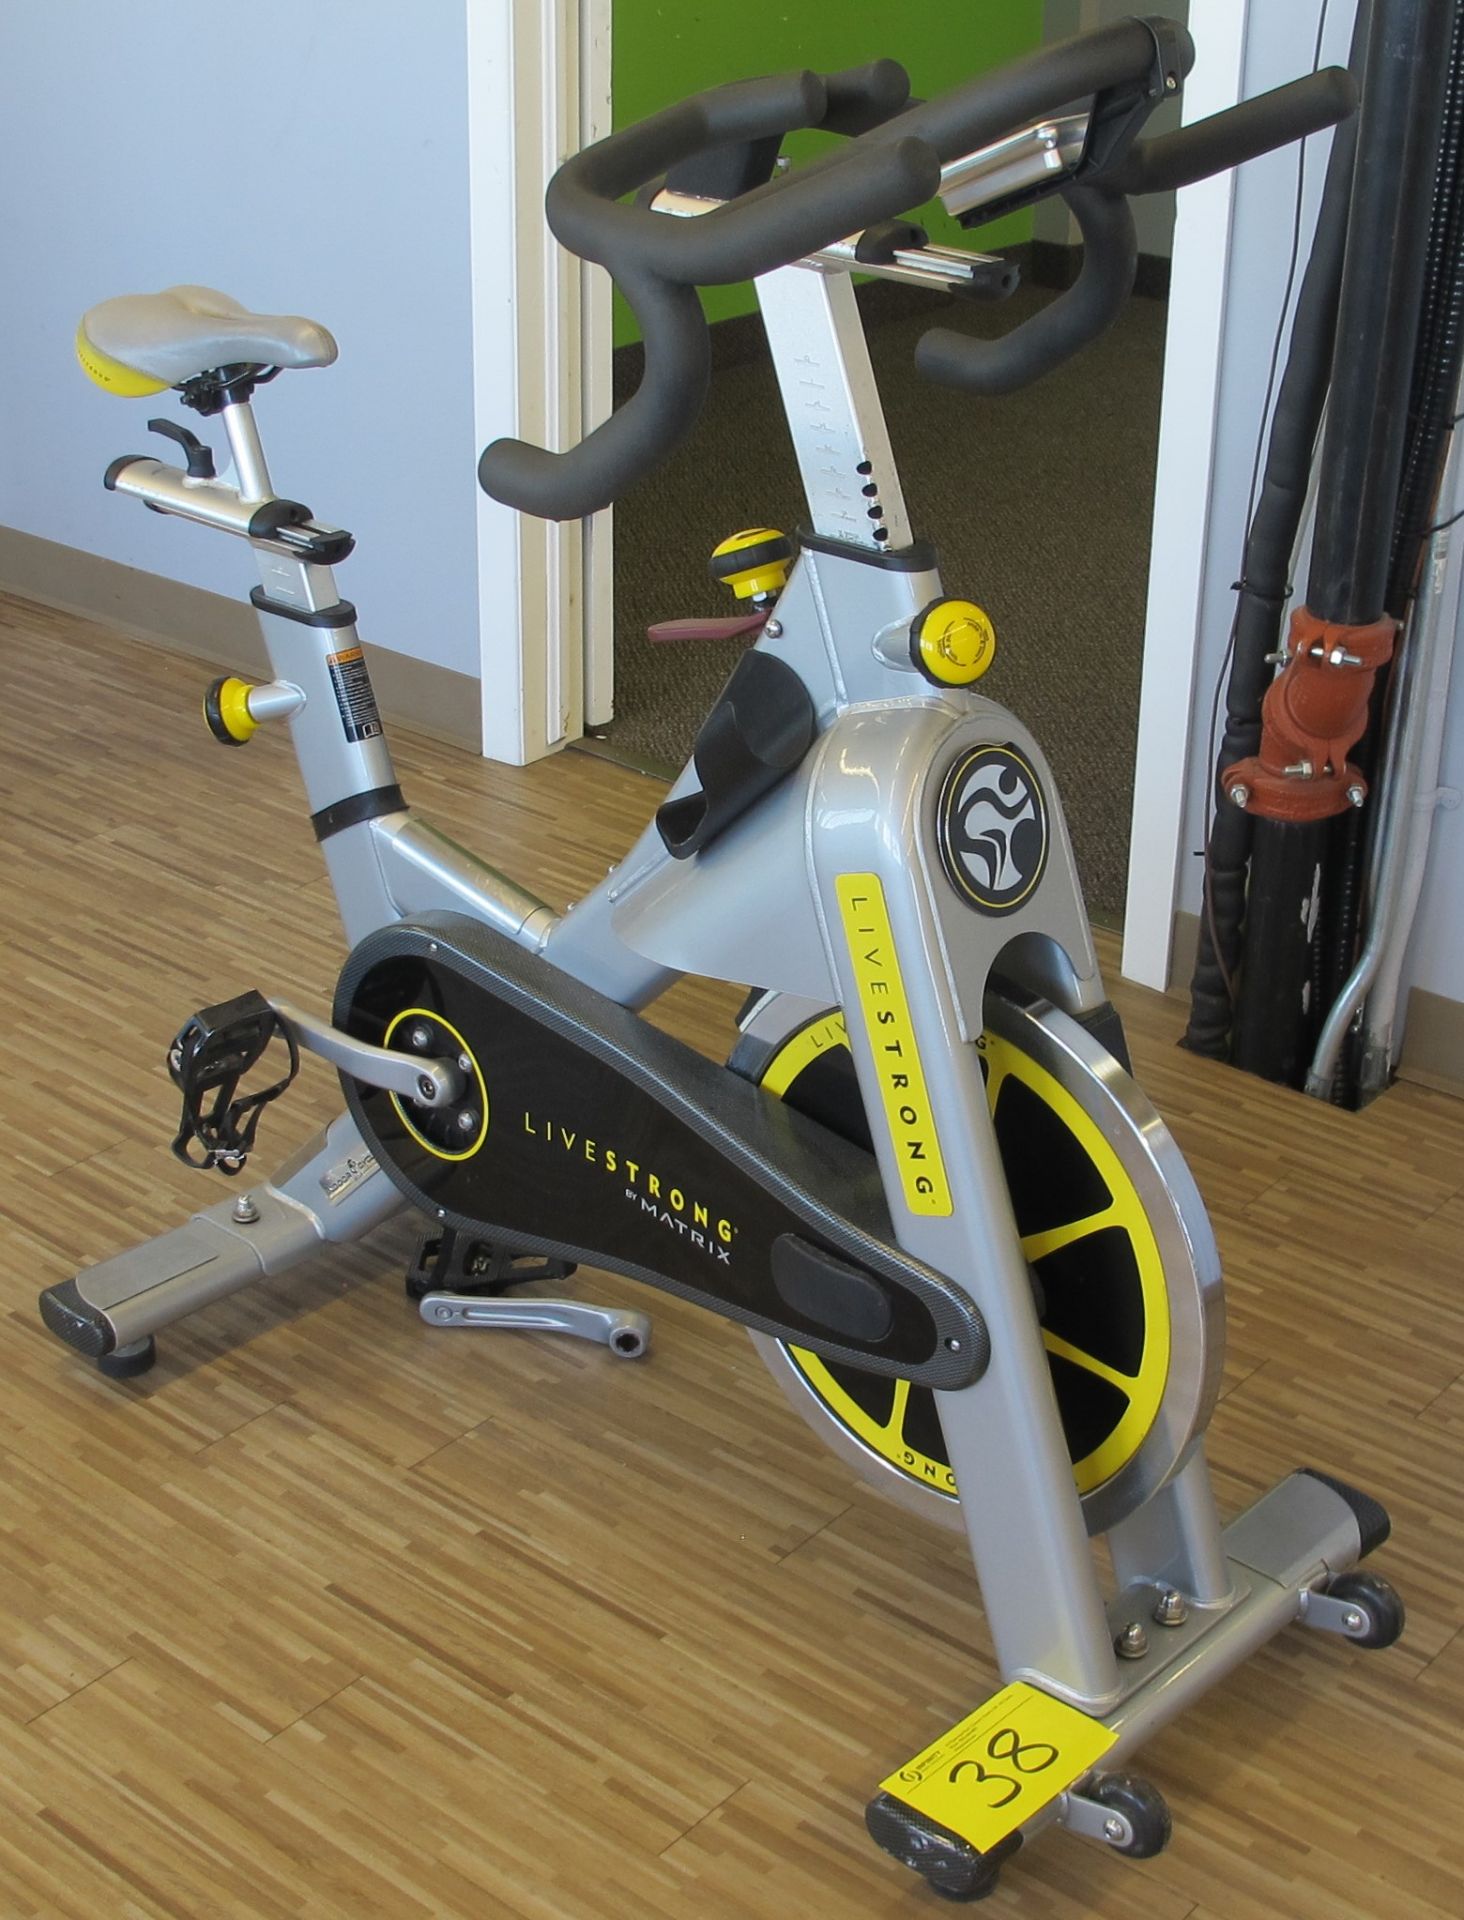 LIVESTRONG LS S-Series Class S Stationary Spin Bike, 'AS-IS', S/N: LASB0008034-111